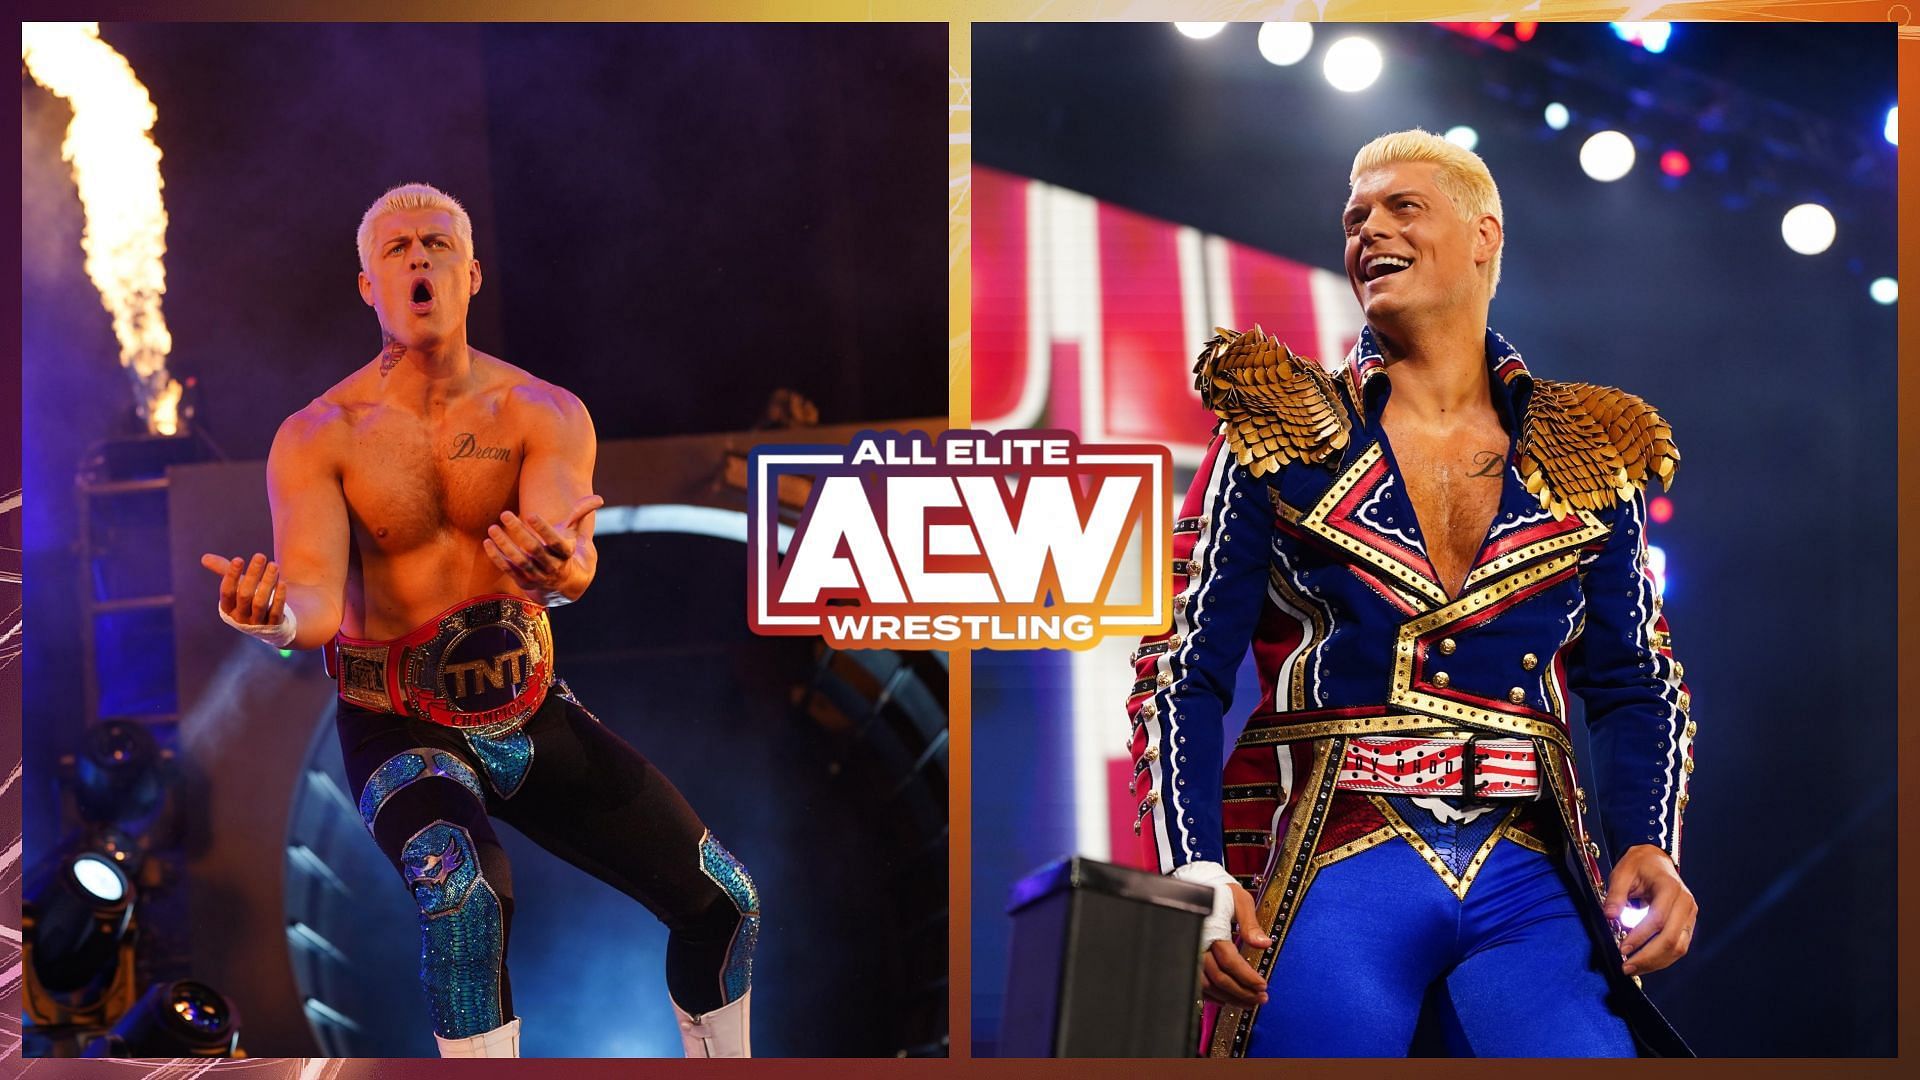 33-year-old star says Cody Rhodes was "a little uneasy" before leaving AEW